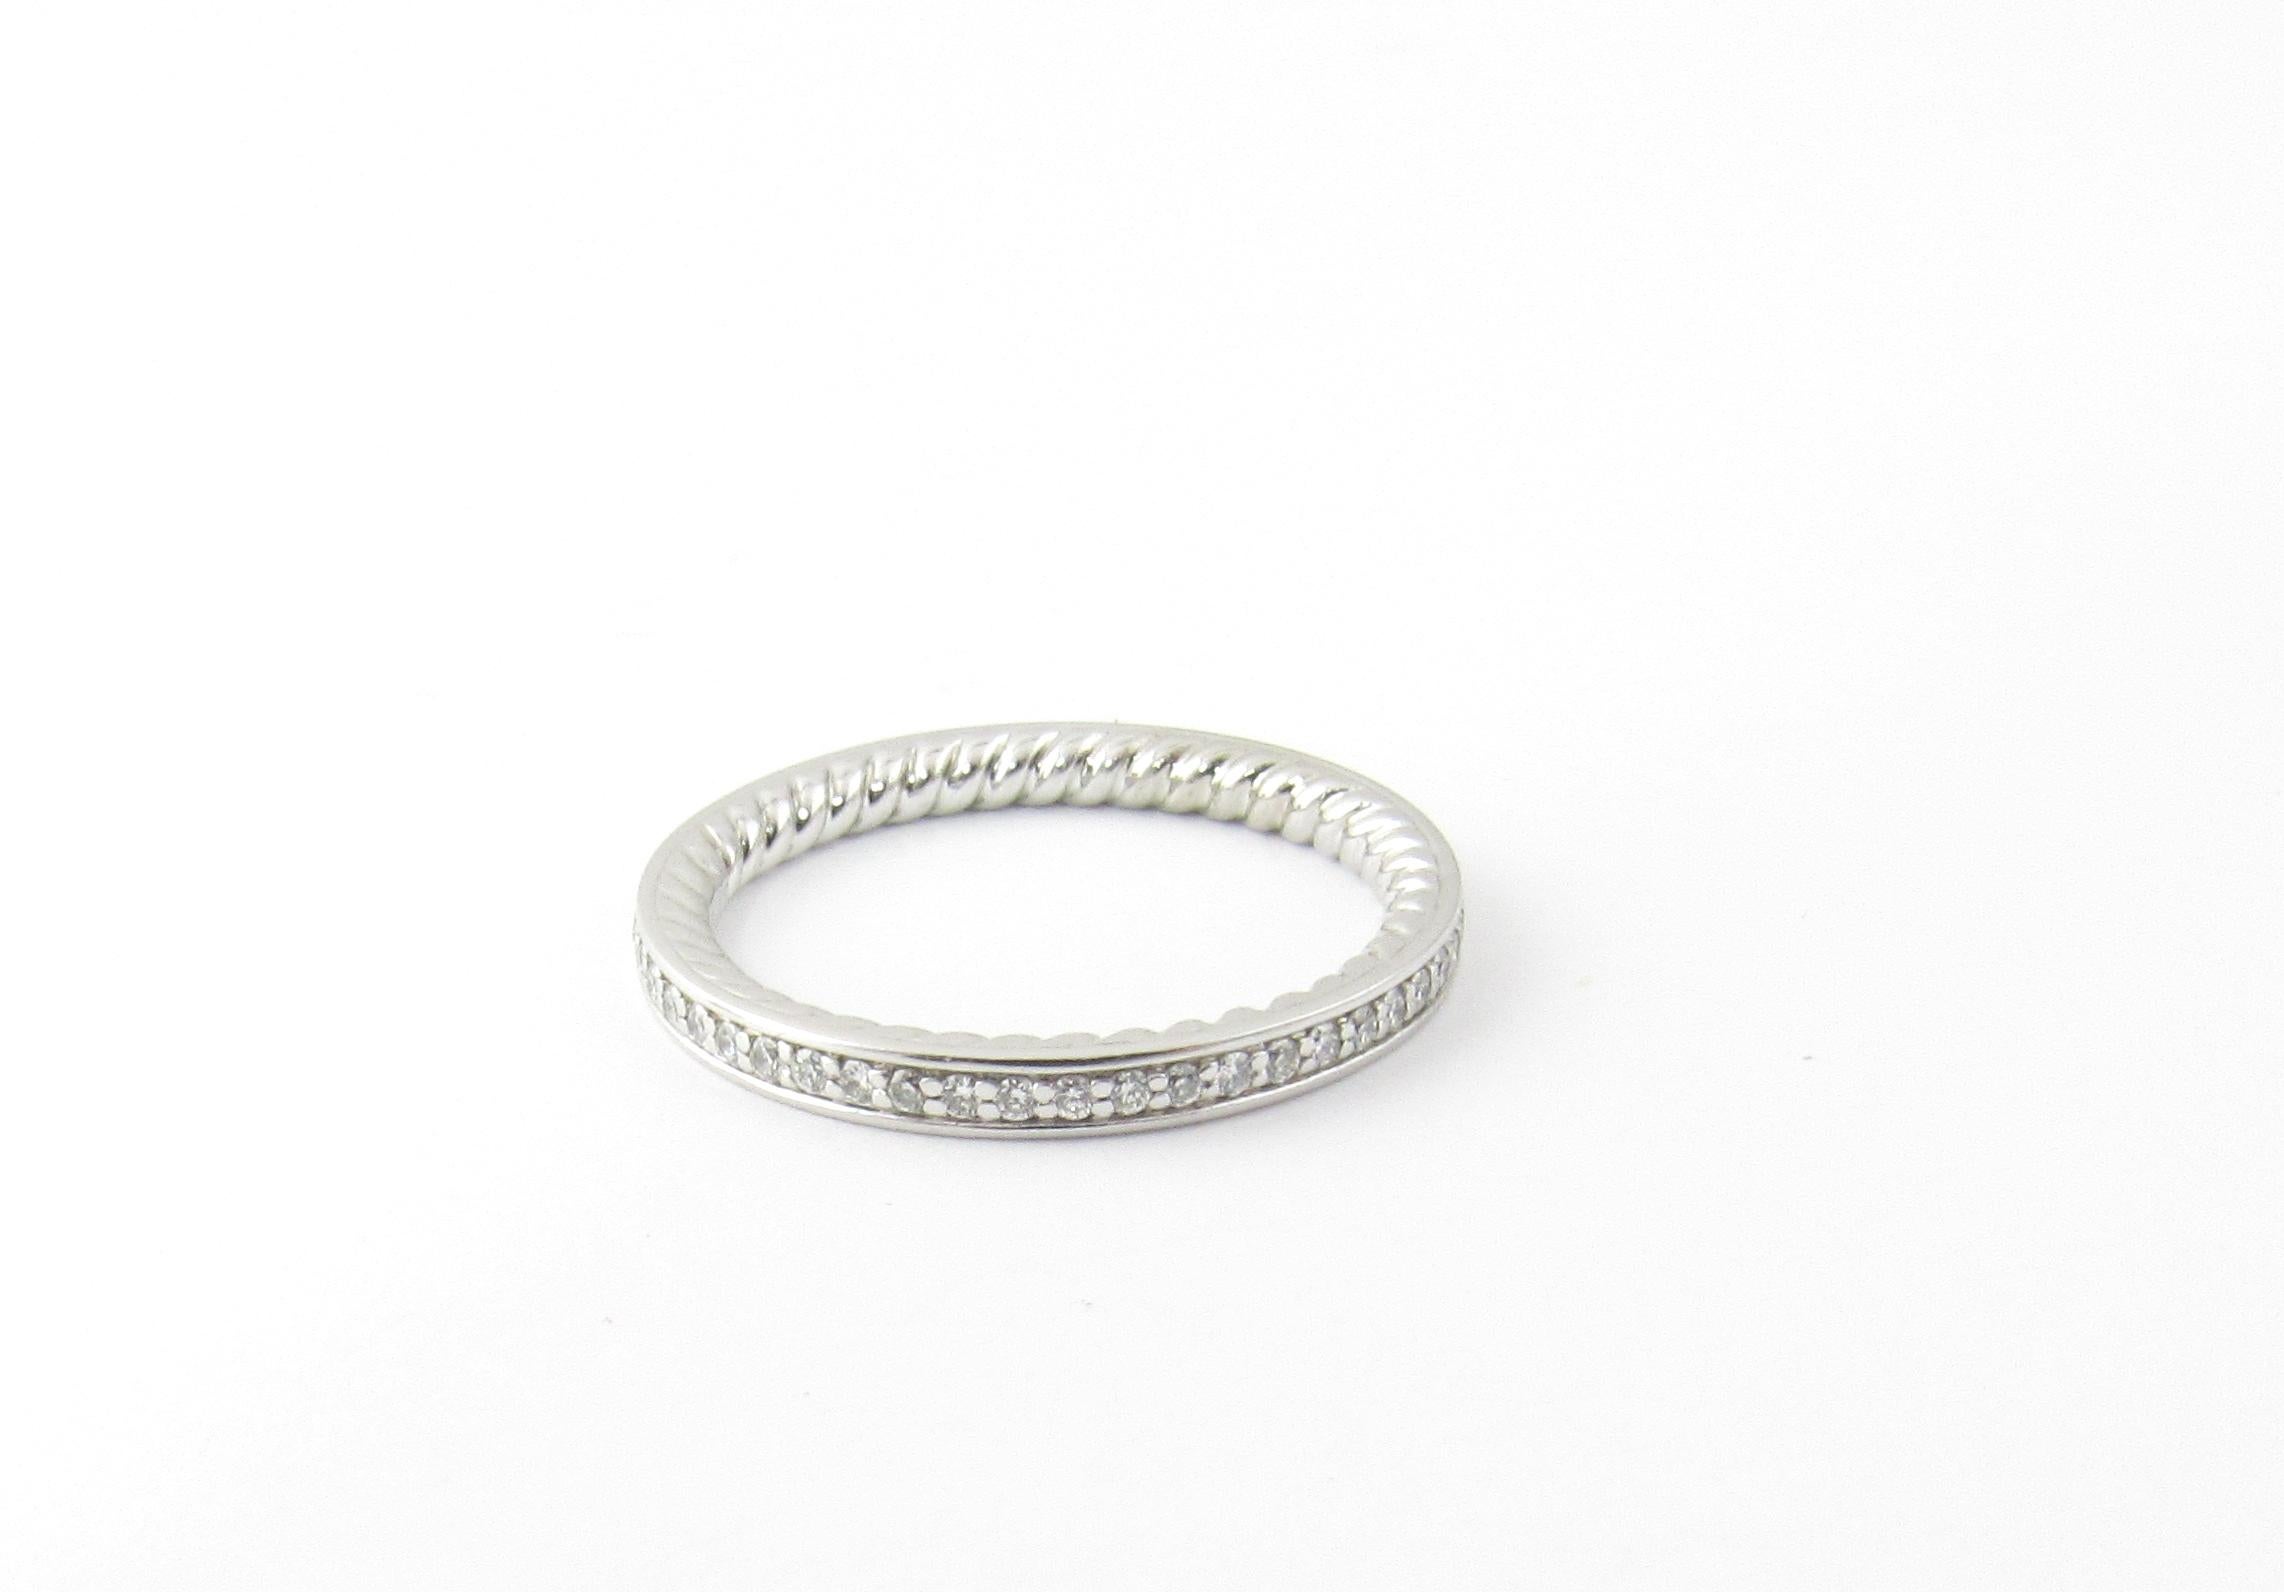 David Yurman Platinum Eden Diamond Eternity Wedding Band 

This authentic David Yurman band is a size 5.5

Channel set diamonds outside with cable design in the ring

Approx. 2mm wide.

Stamped DY PT950

2.1 dwt / 3.1 g

Round brilliant diamond of